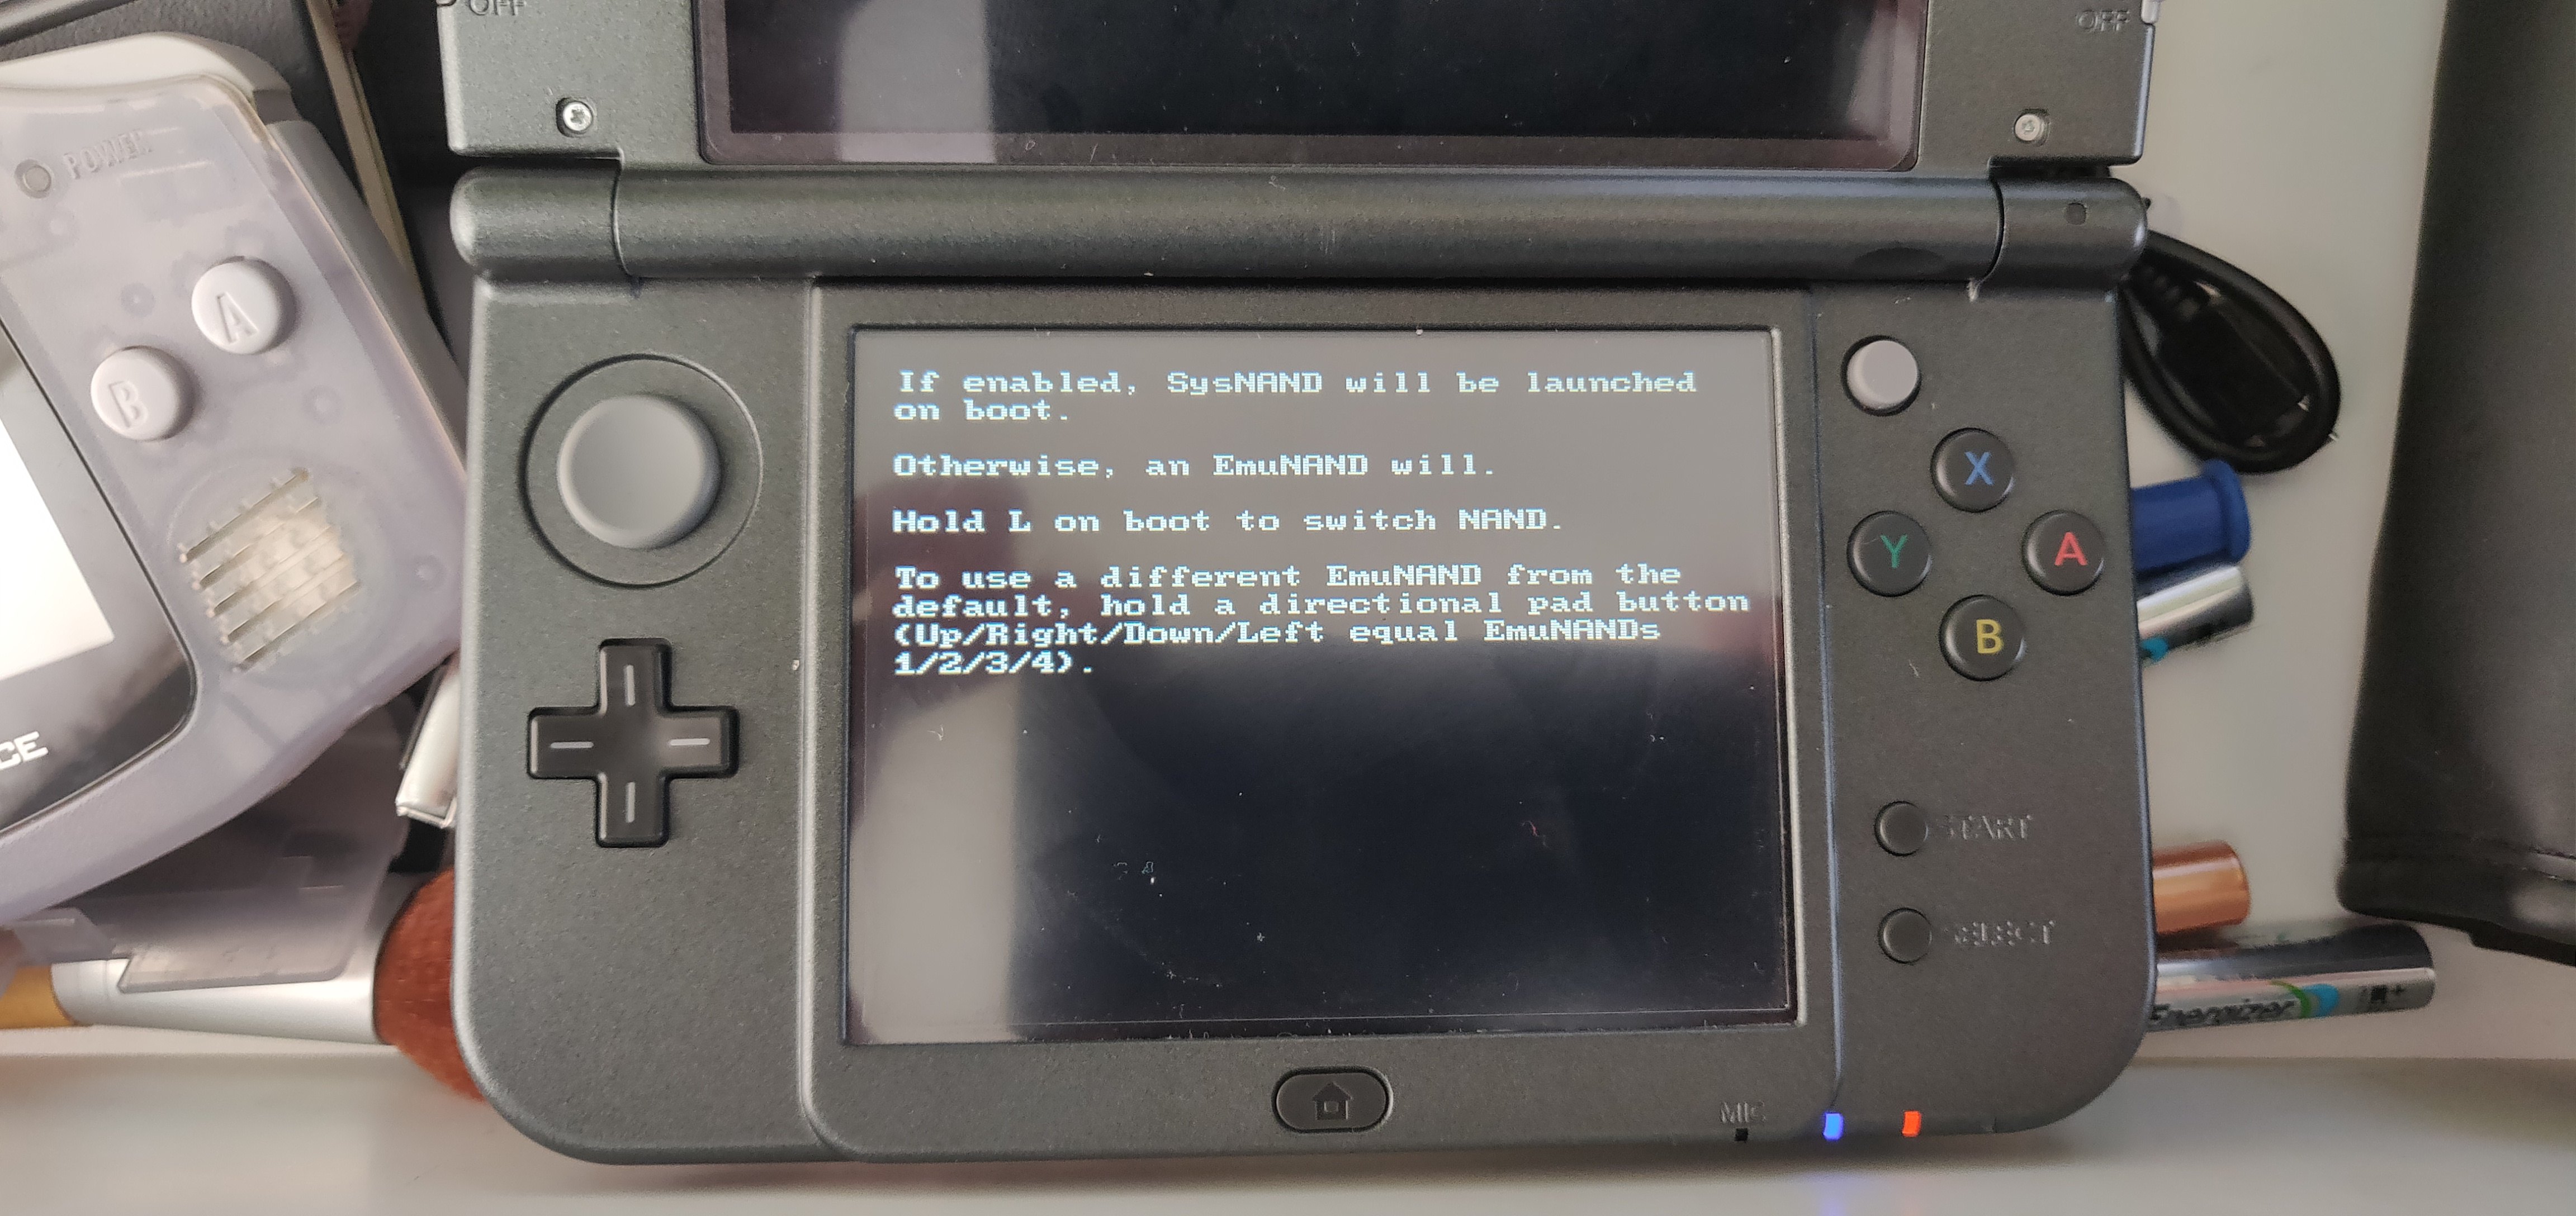 inden længe salon Gnaven New 3DS XL - Blue Light On then fades, Top Screen Flashes 1 sec when SD  Card is inside | GBAtemp.net - The Independent Video Game Community